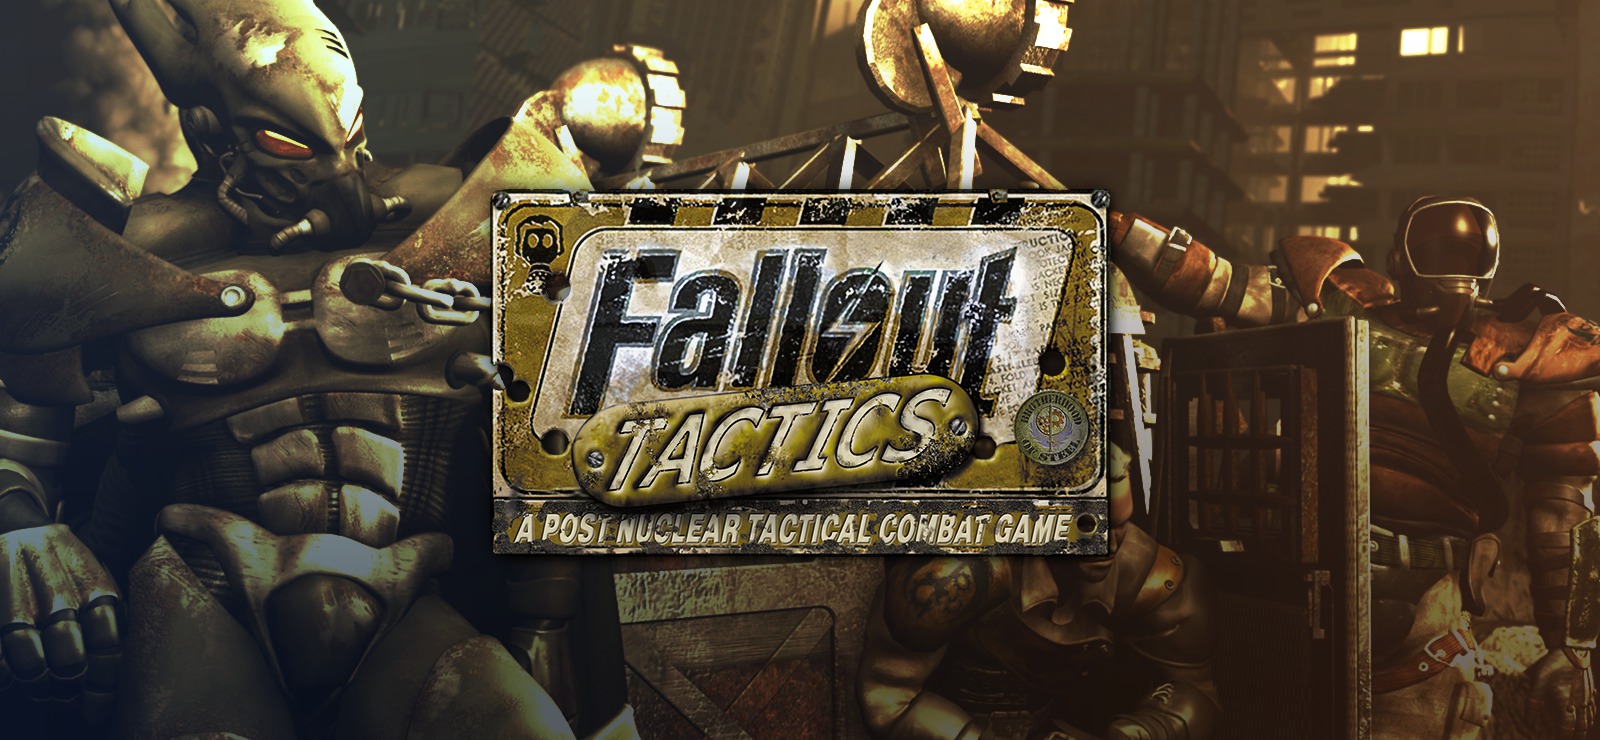 Does Fallout 2 Download Gog Compatible Mac